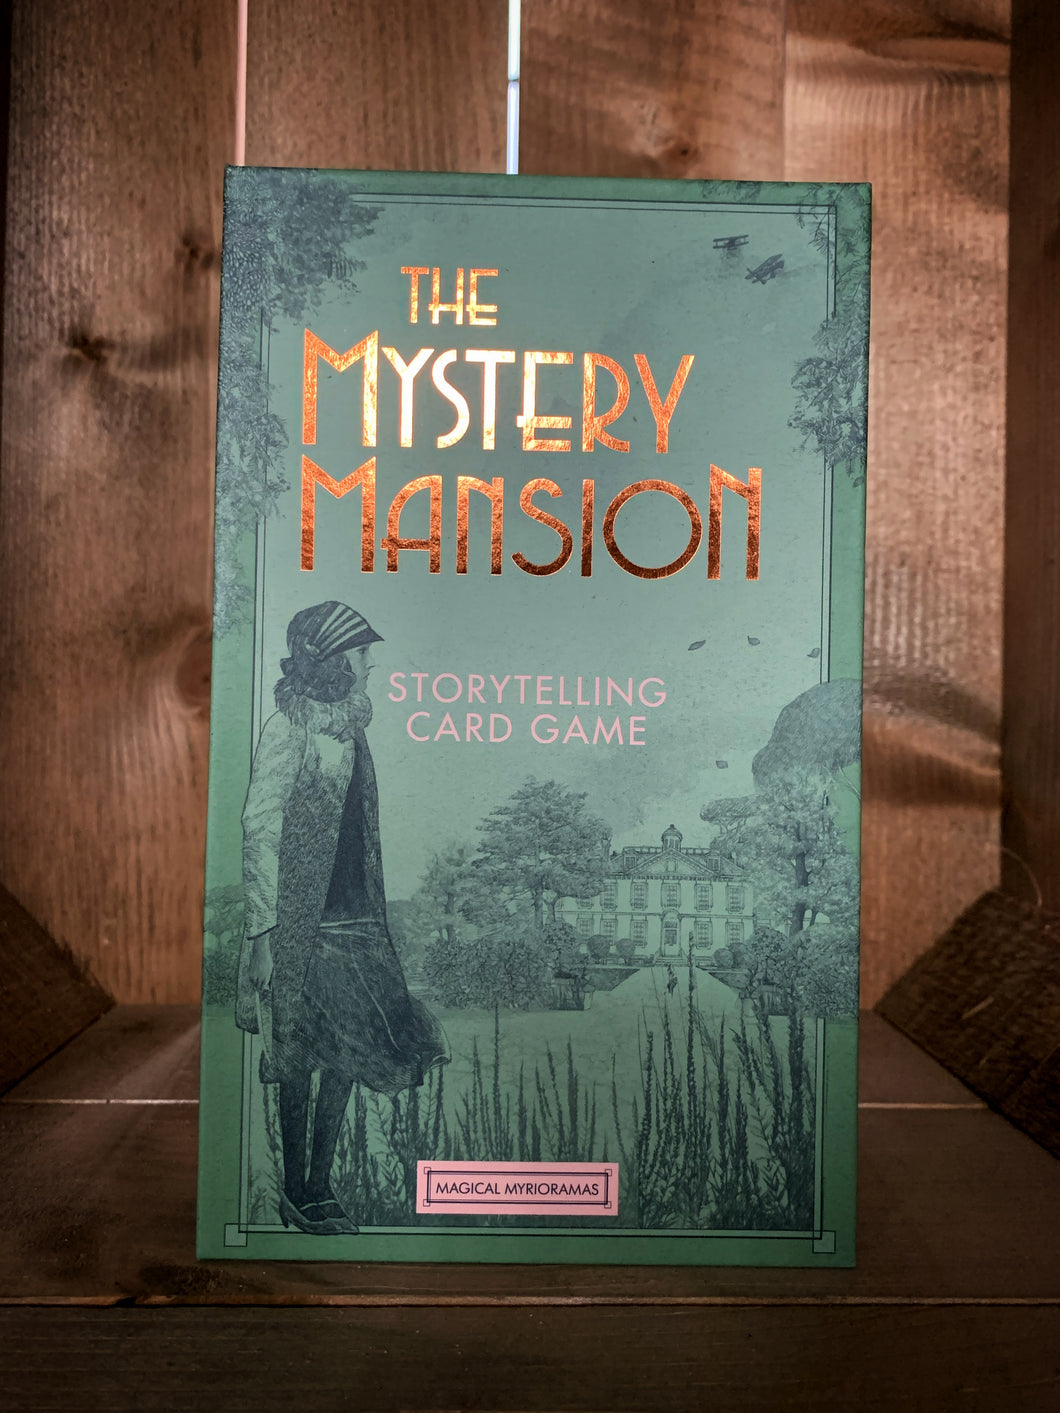 Image of the front of the box for The Mystery Mansion: Storytelling Card Game. The background is a sage green, with the title written in foiled bronze text. There is a basic art deco border, and an illustration of a woman in 1930's dress in the foreground, and a  mansion hidden behind trees in the distance.